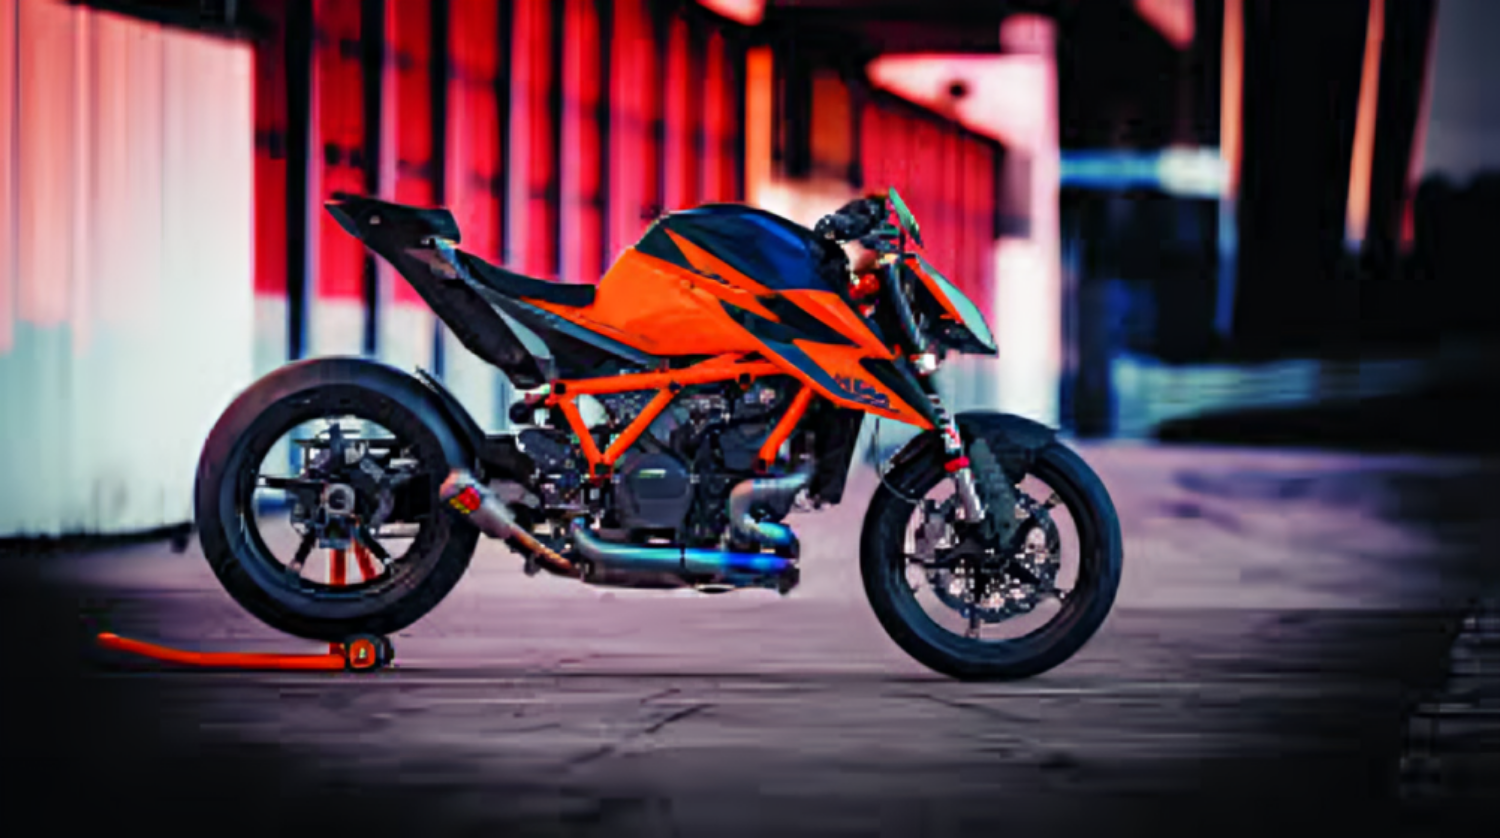 KTM is bringing a bike with an automatic gearbox, getting rid of the hassle of frequent gear changes की तस्वीर